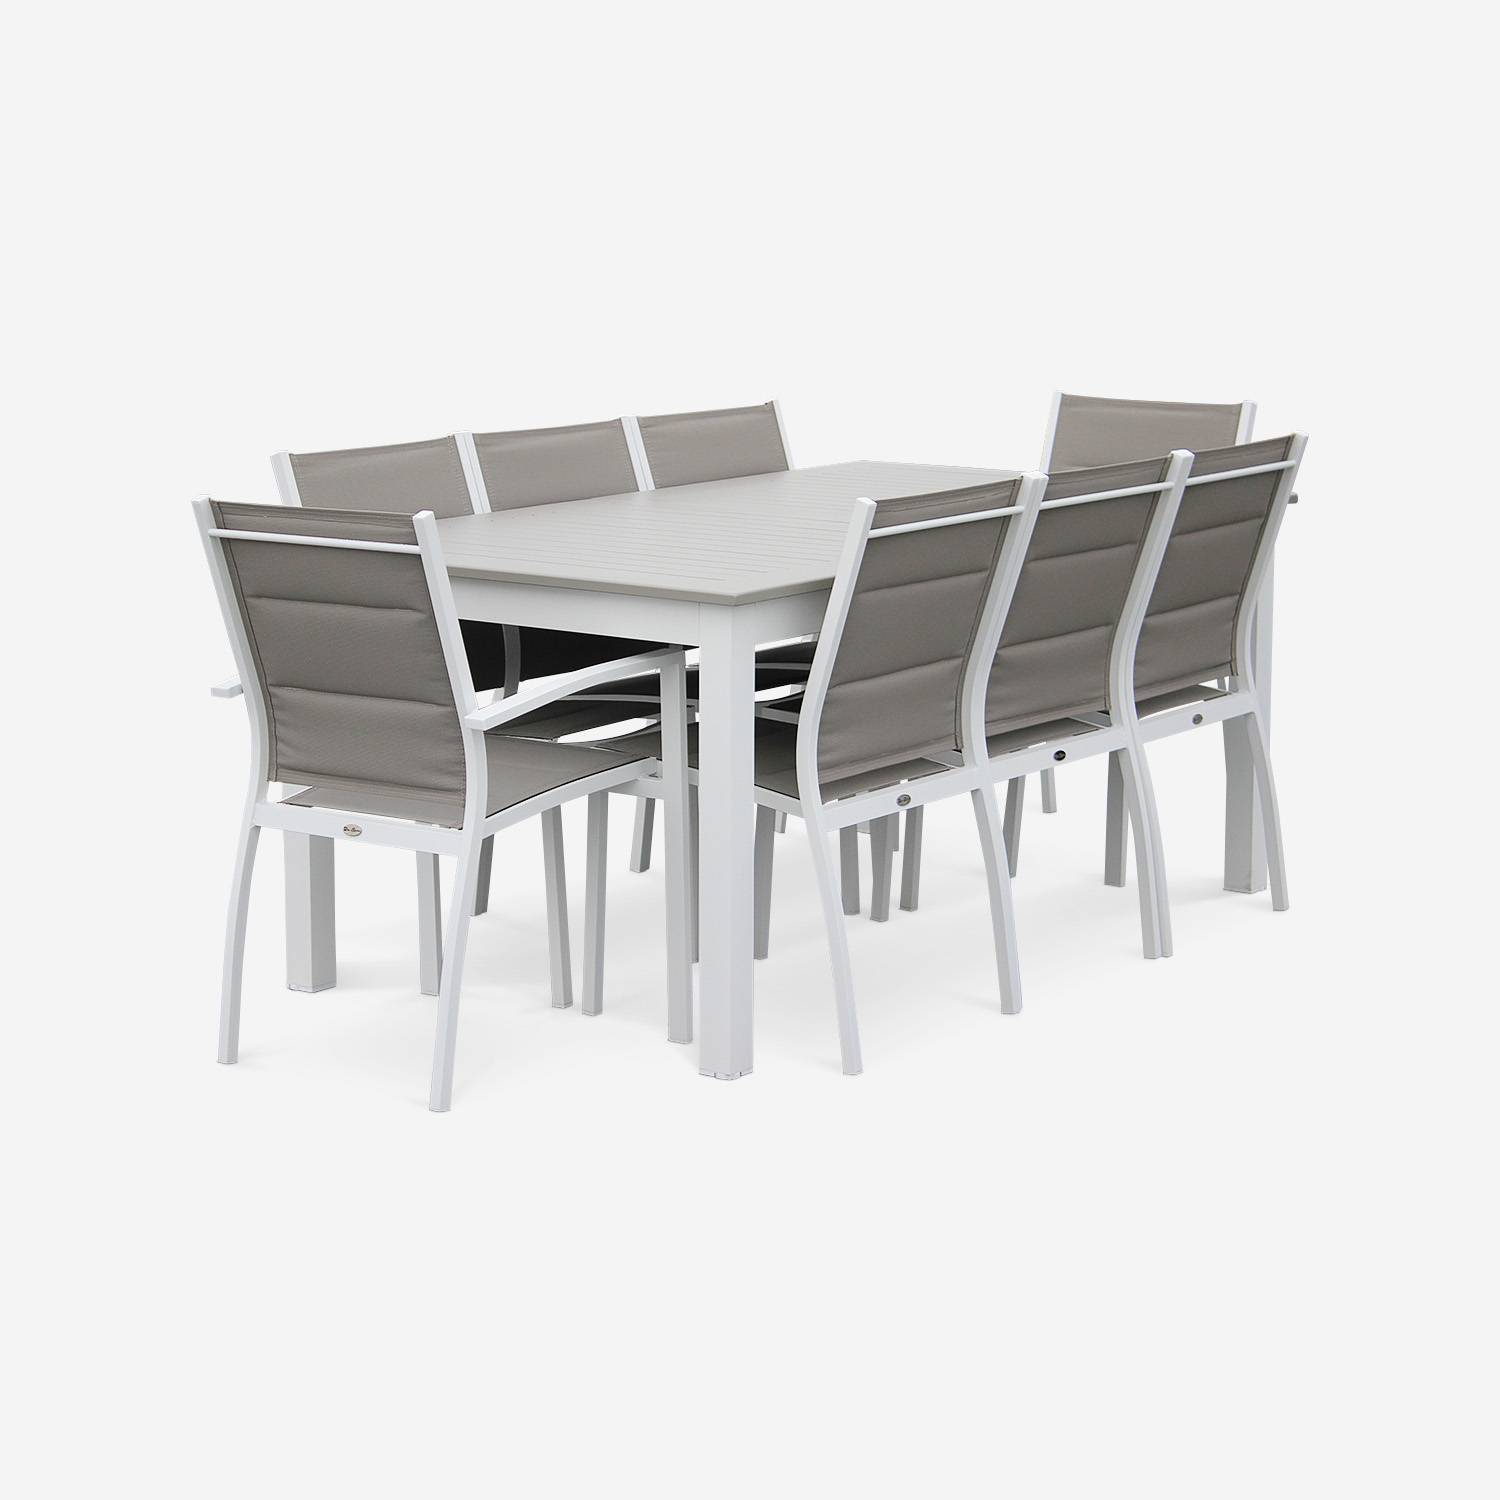 8-seater garden dining set, extendable 175-245cm aluminium table, 6 chairs and 2 armchairs - Chicago 8 - White frame, Beige-Brown textilene,sweeek,Photo3